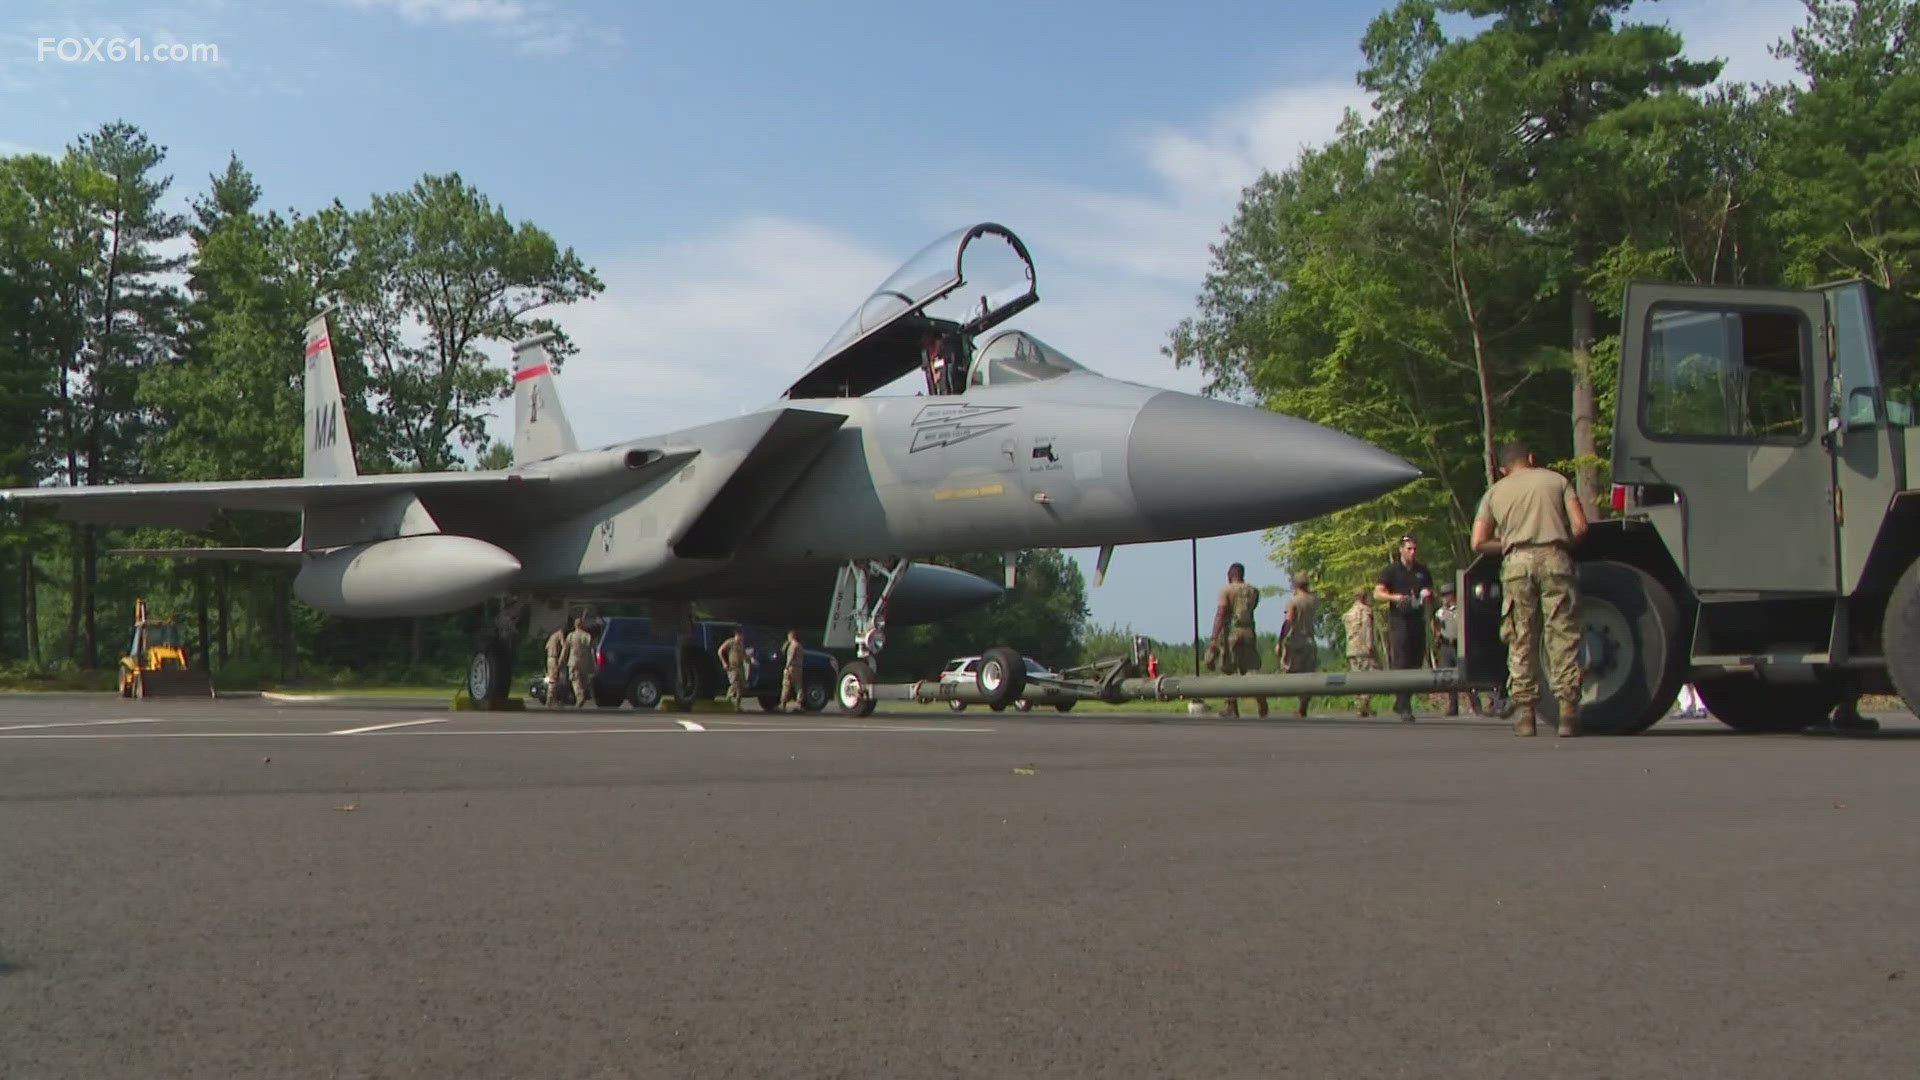 On Thursday, an F–15C Eagle Fighter Jet was delivered from the Connecticut Air National Guard Base at Bradley Airport to the museum.